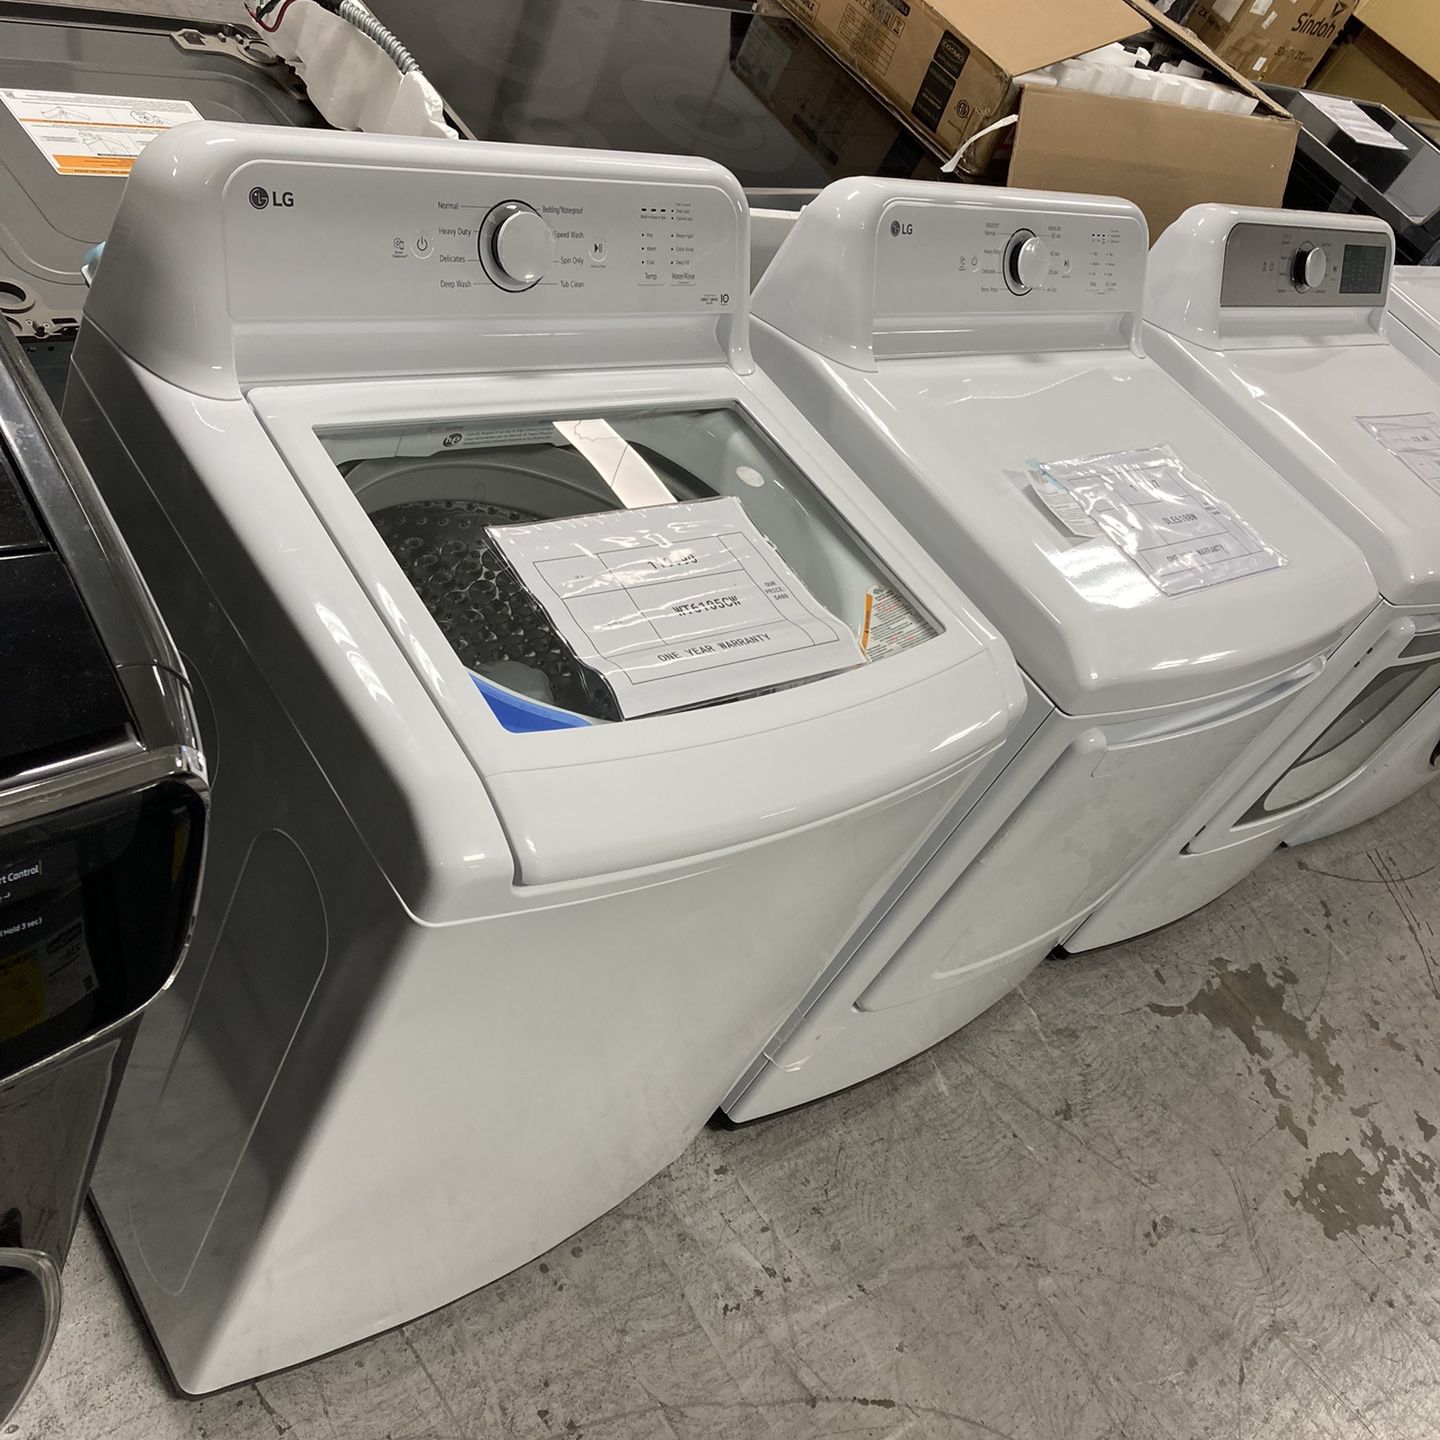 LG SMART WASHER WITH AGITATOR AND GAS DRYER SET